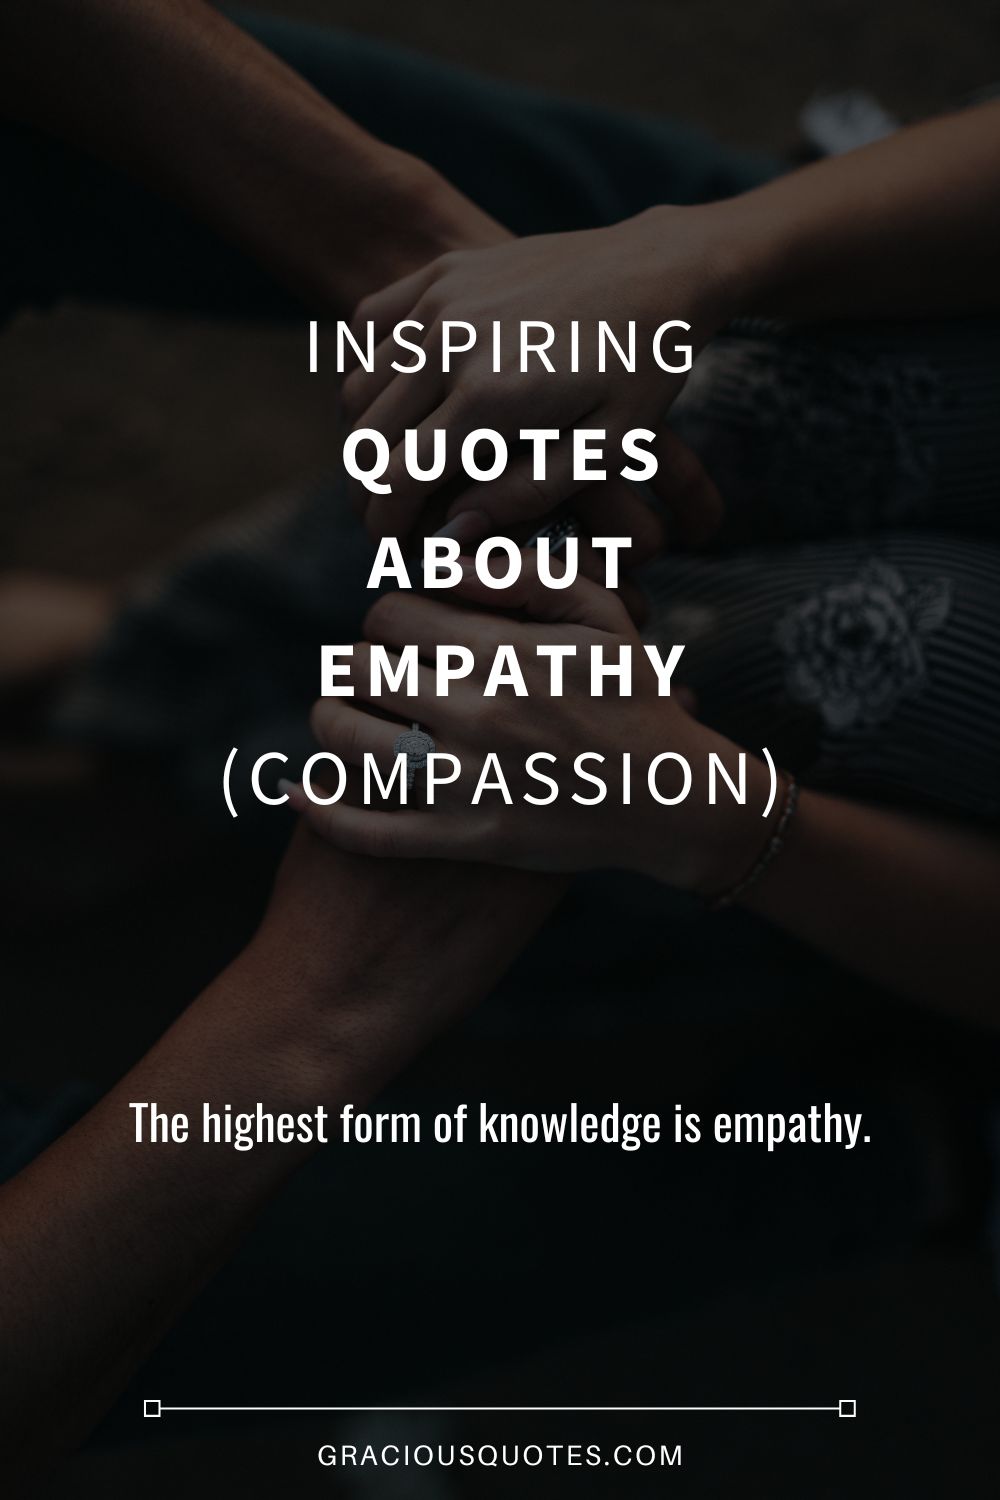 Inspiring Quotes About Empathy (COMPASSION) - Gracious Quotes